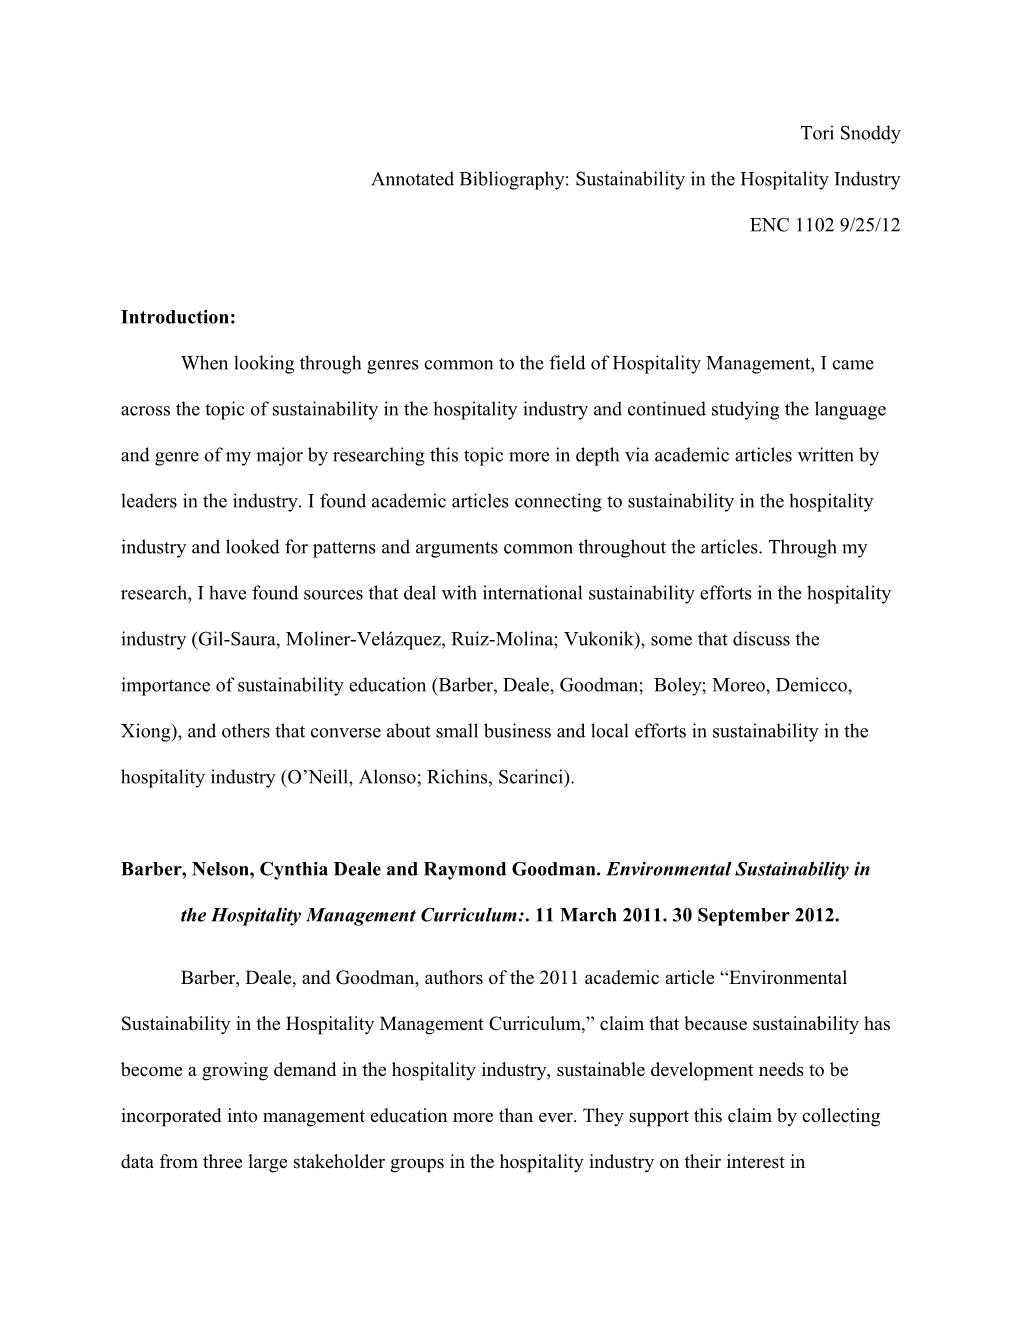 Annotated Bibliography: Sustainability In The Hospitality Industry